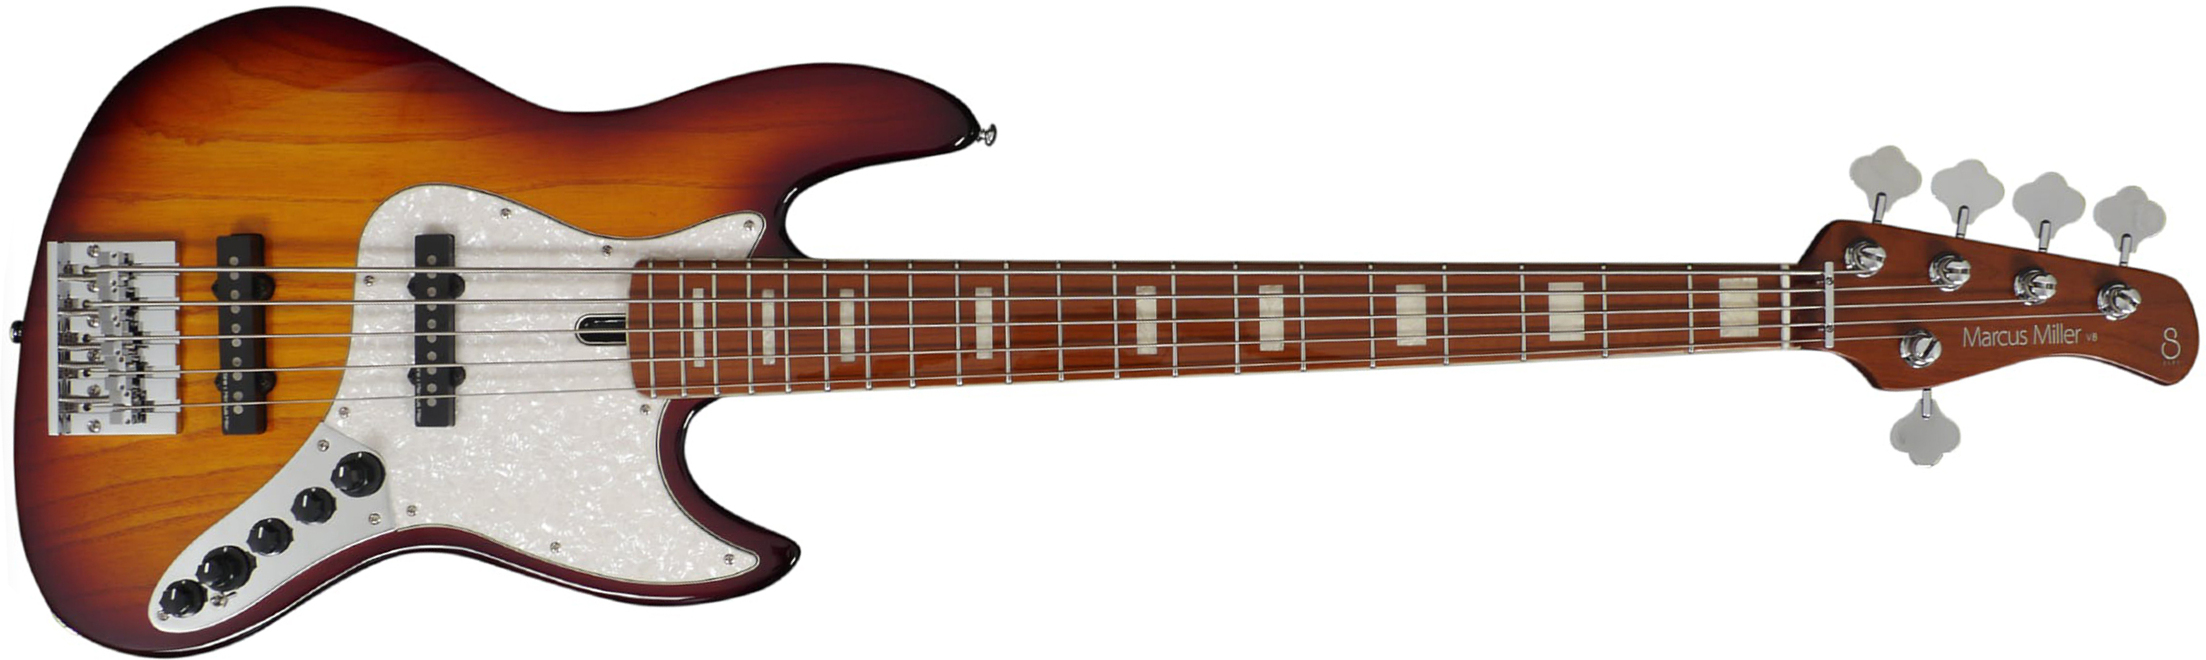 Marcus Miller V8 5st 5c Active Mn - Tobacco Sunburst - Solid body electric bass - Main picture